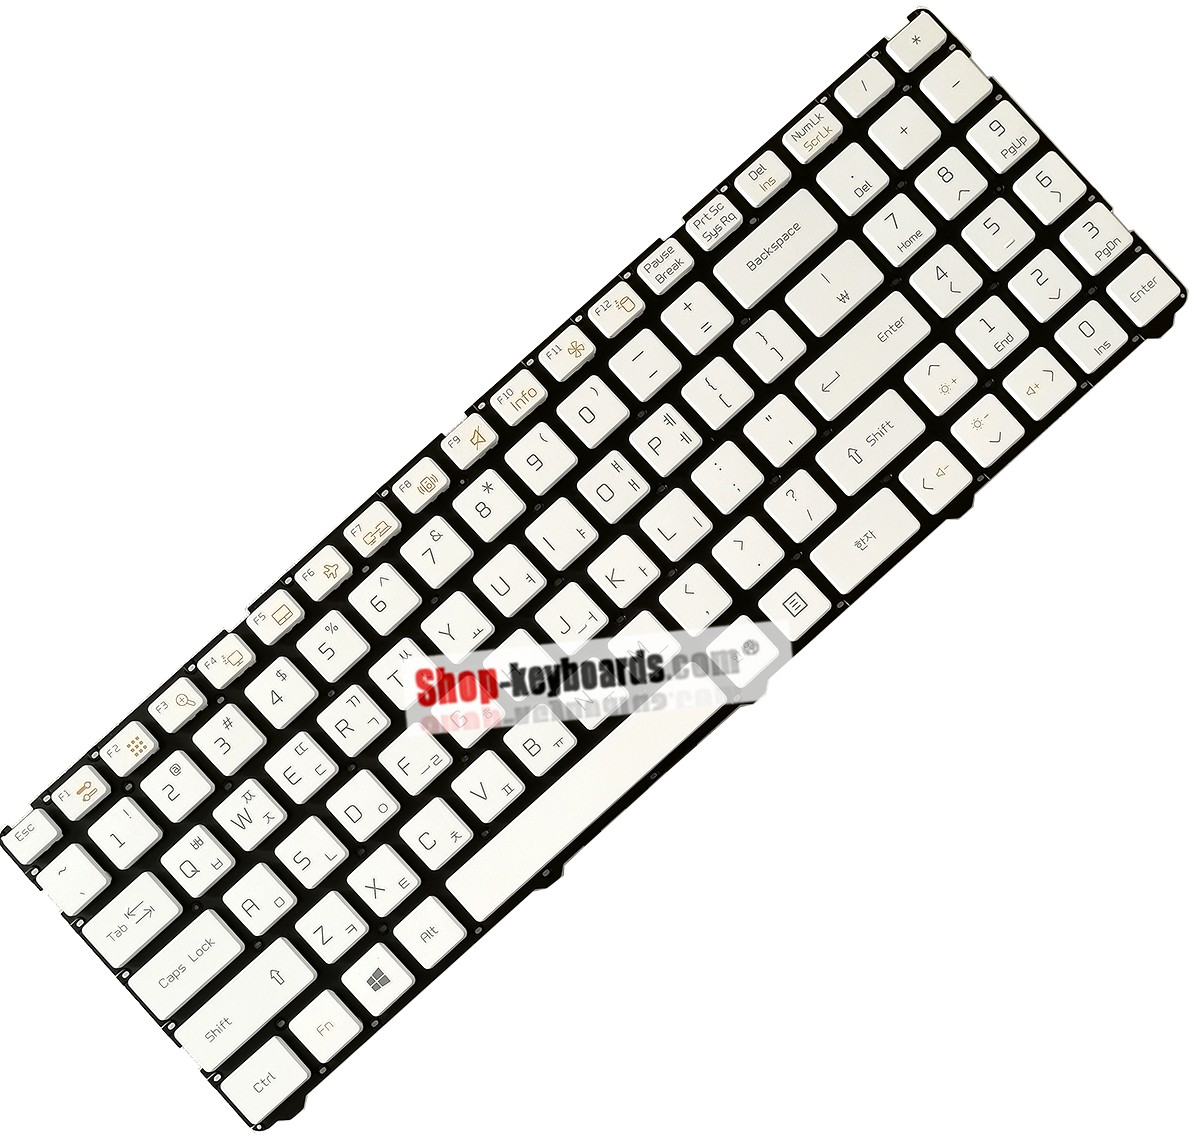 LG MP-12K73D0-9208 Keyboard replacement